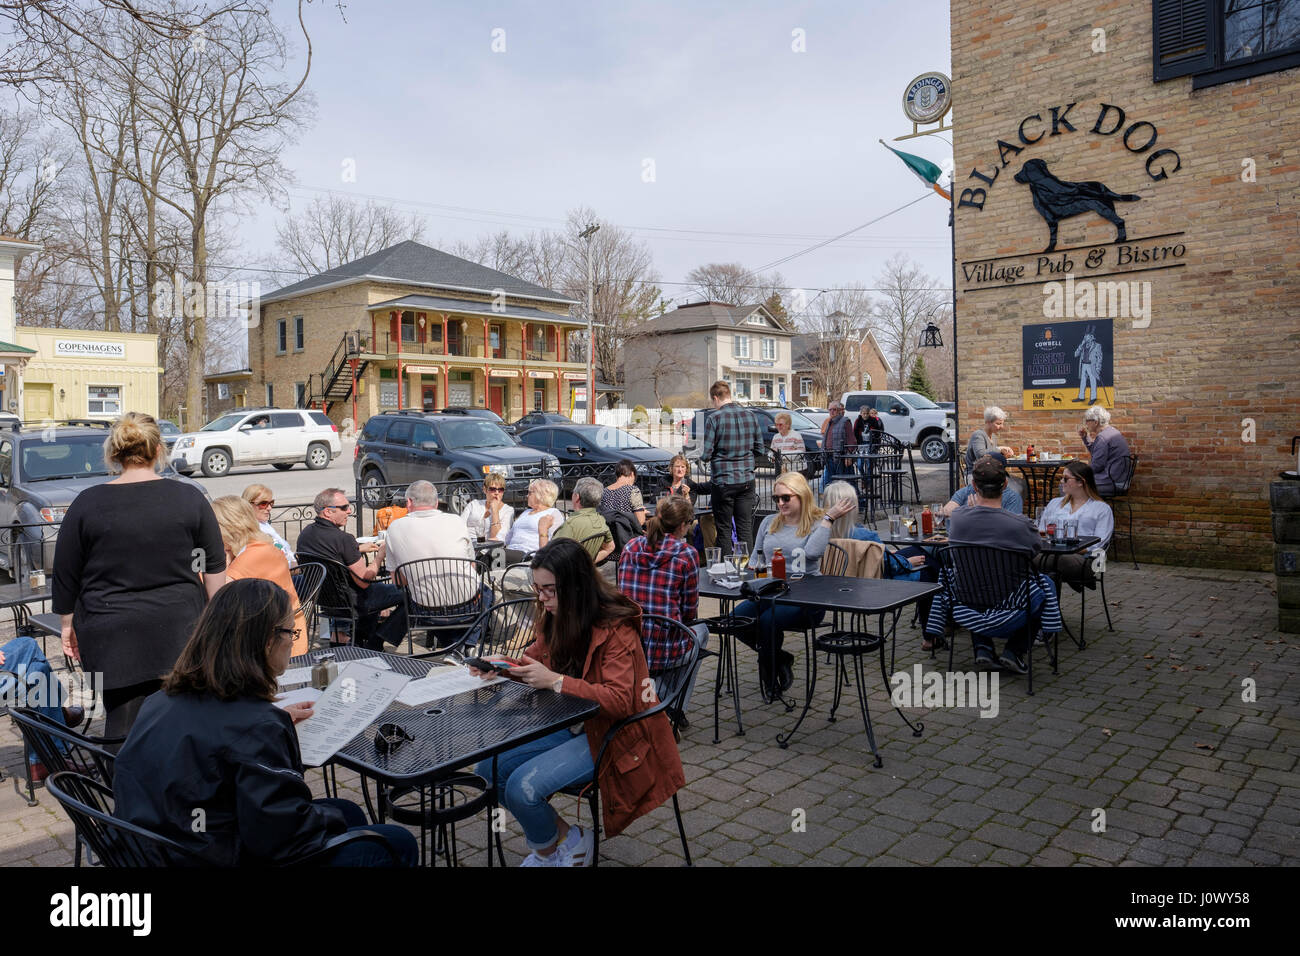 Customers sitting on tables on the outside patio at Black Dog Village Pub & Bistro, a bar, pub, restaurant in the Village of Bayfield, Ontario. Stock Photo